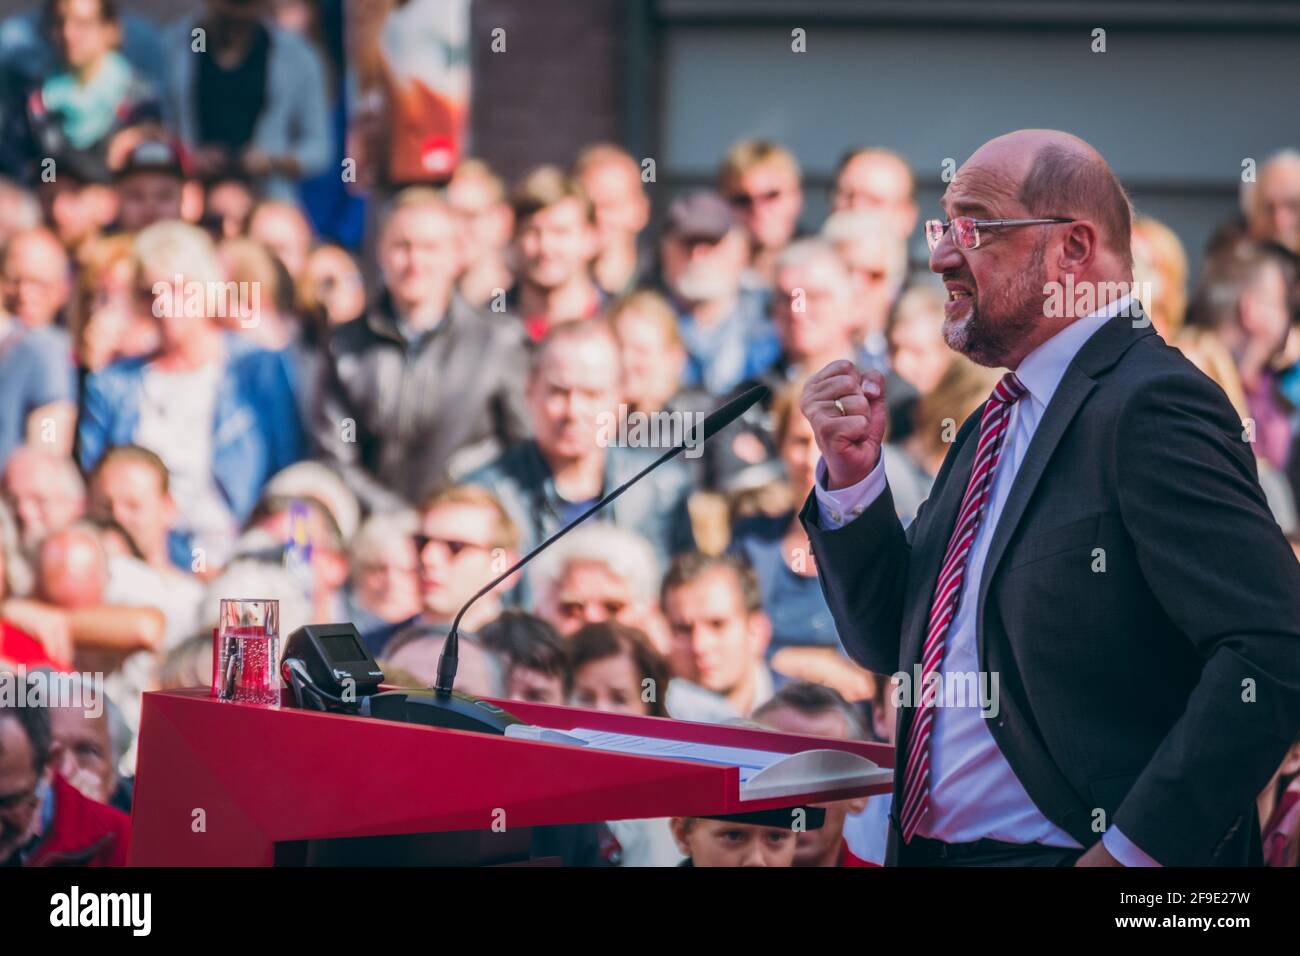 Aachen, Germany - 23 September 2017: Martin Schulz, German politician and social democrats candidate for the chancellorship helds election campaign sp Stock Photo